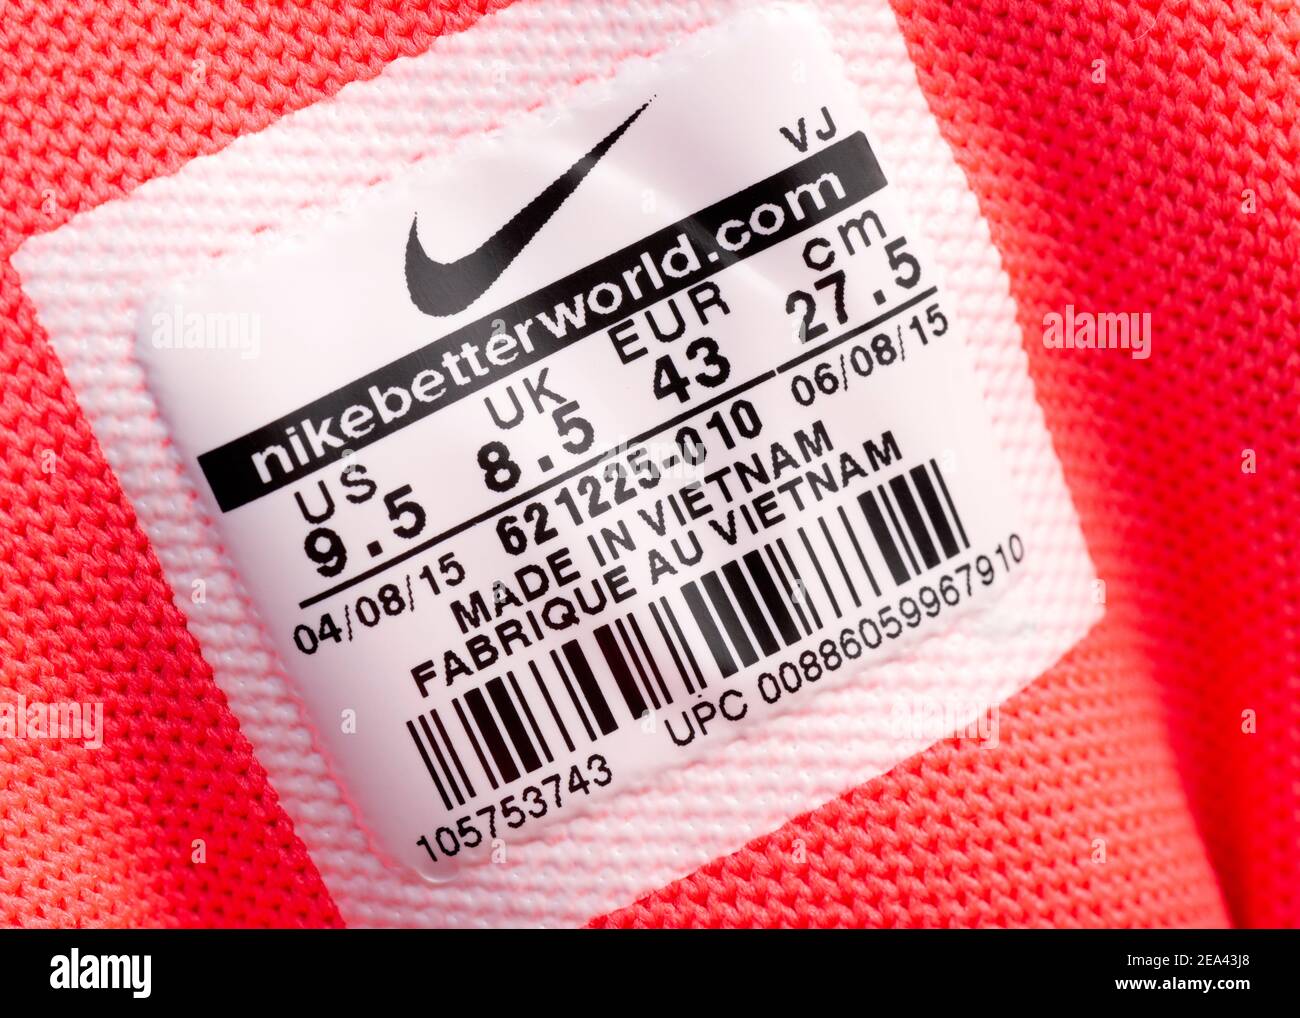 Nike Made in Vietnam label on pink 